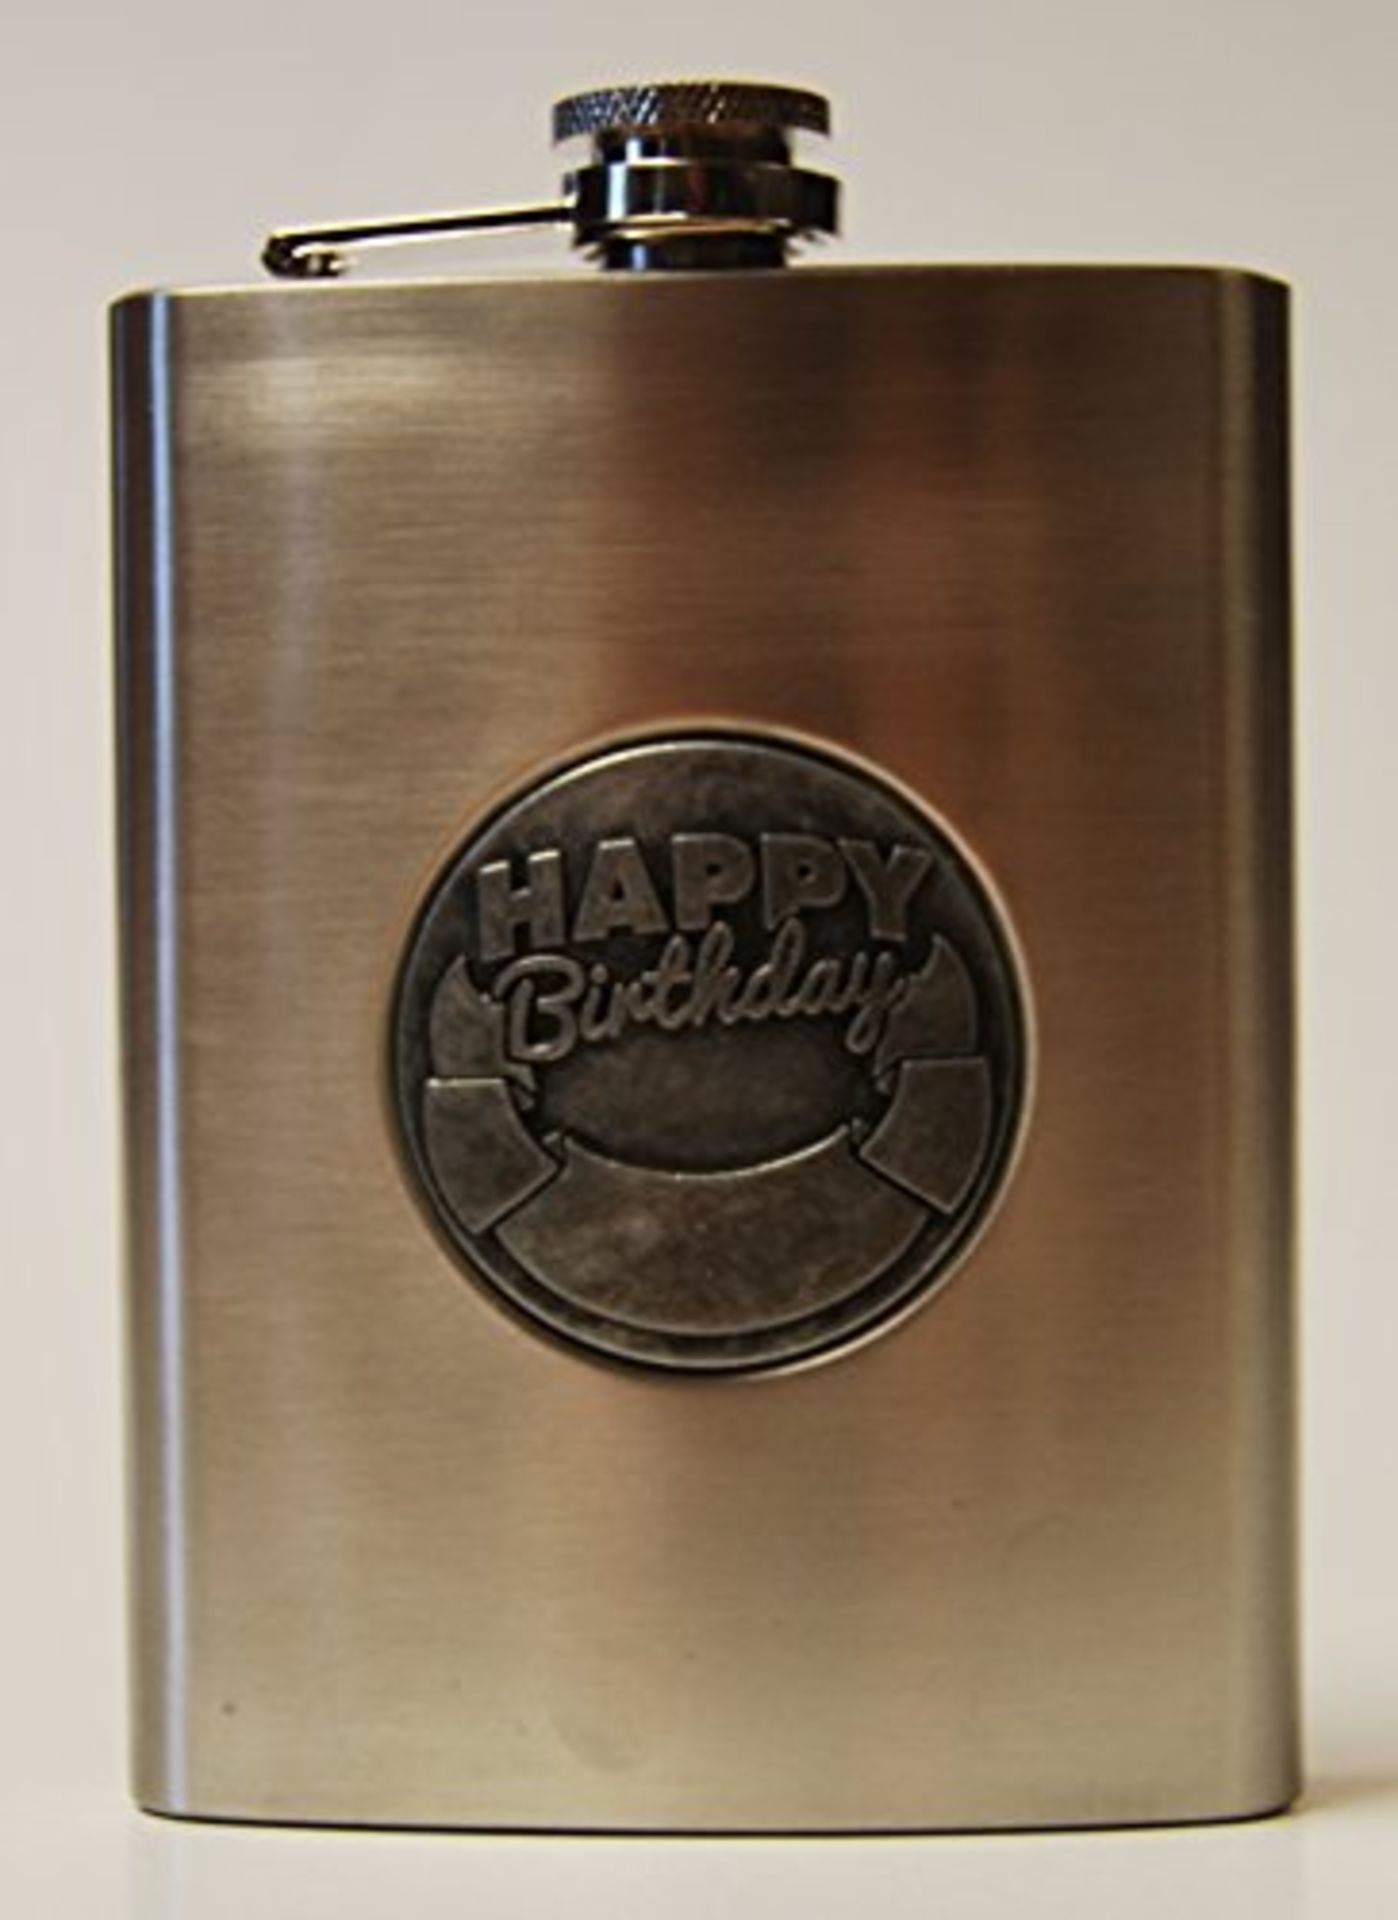 V *TRADE QTY* Brand New Happy Birthday Hip Flask X 4 YOUR BID PRICE TO BE MULTIPLIED BY FOUR